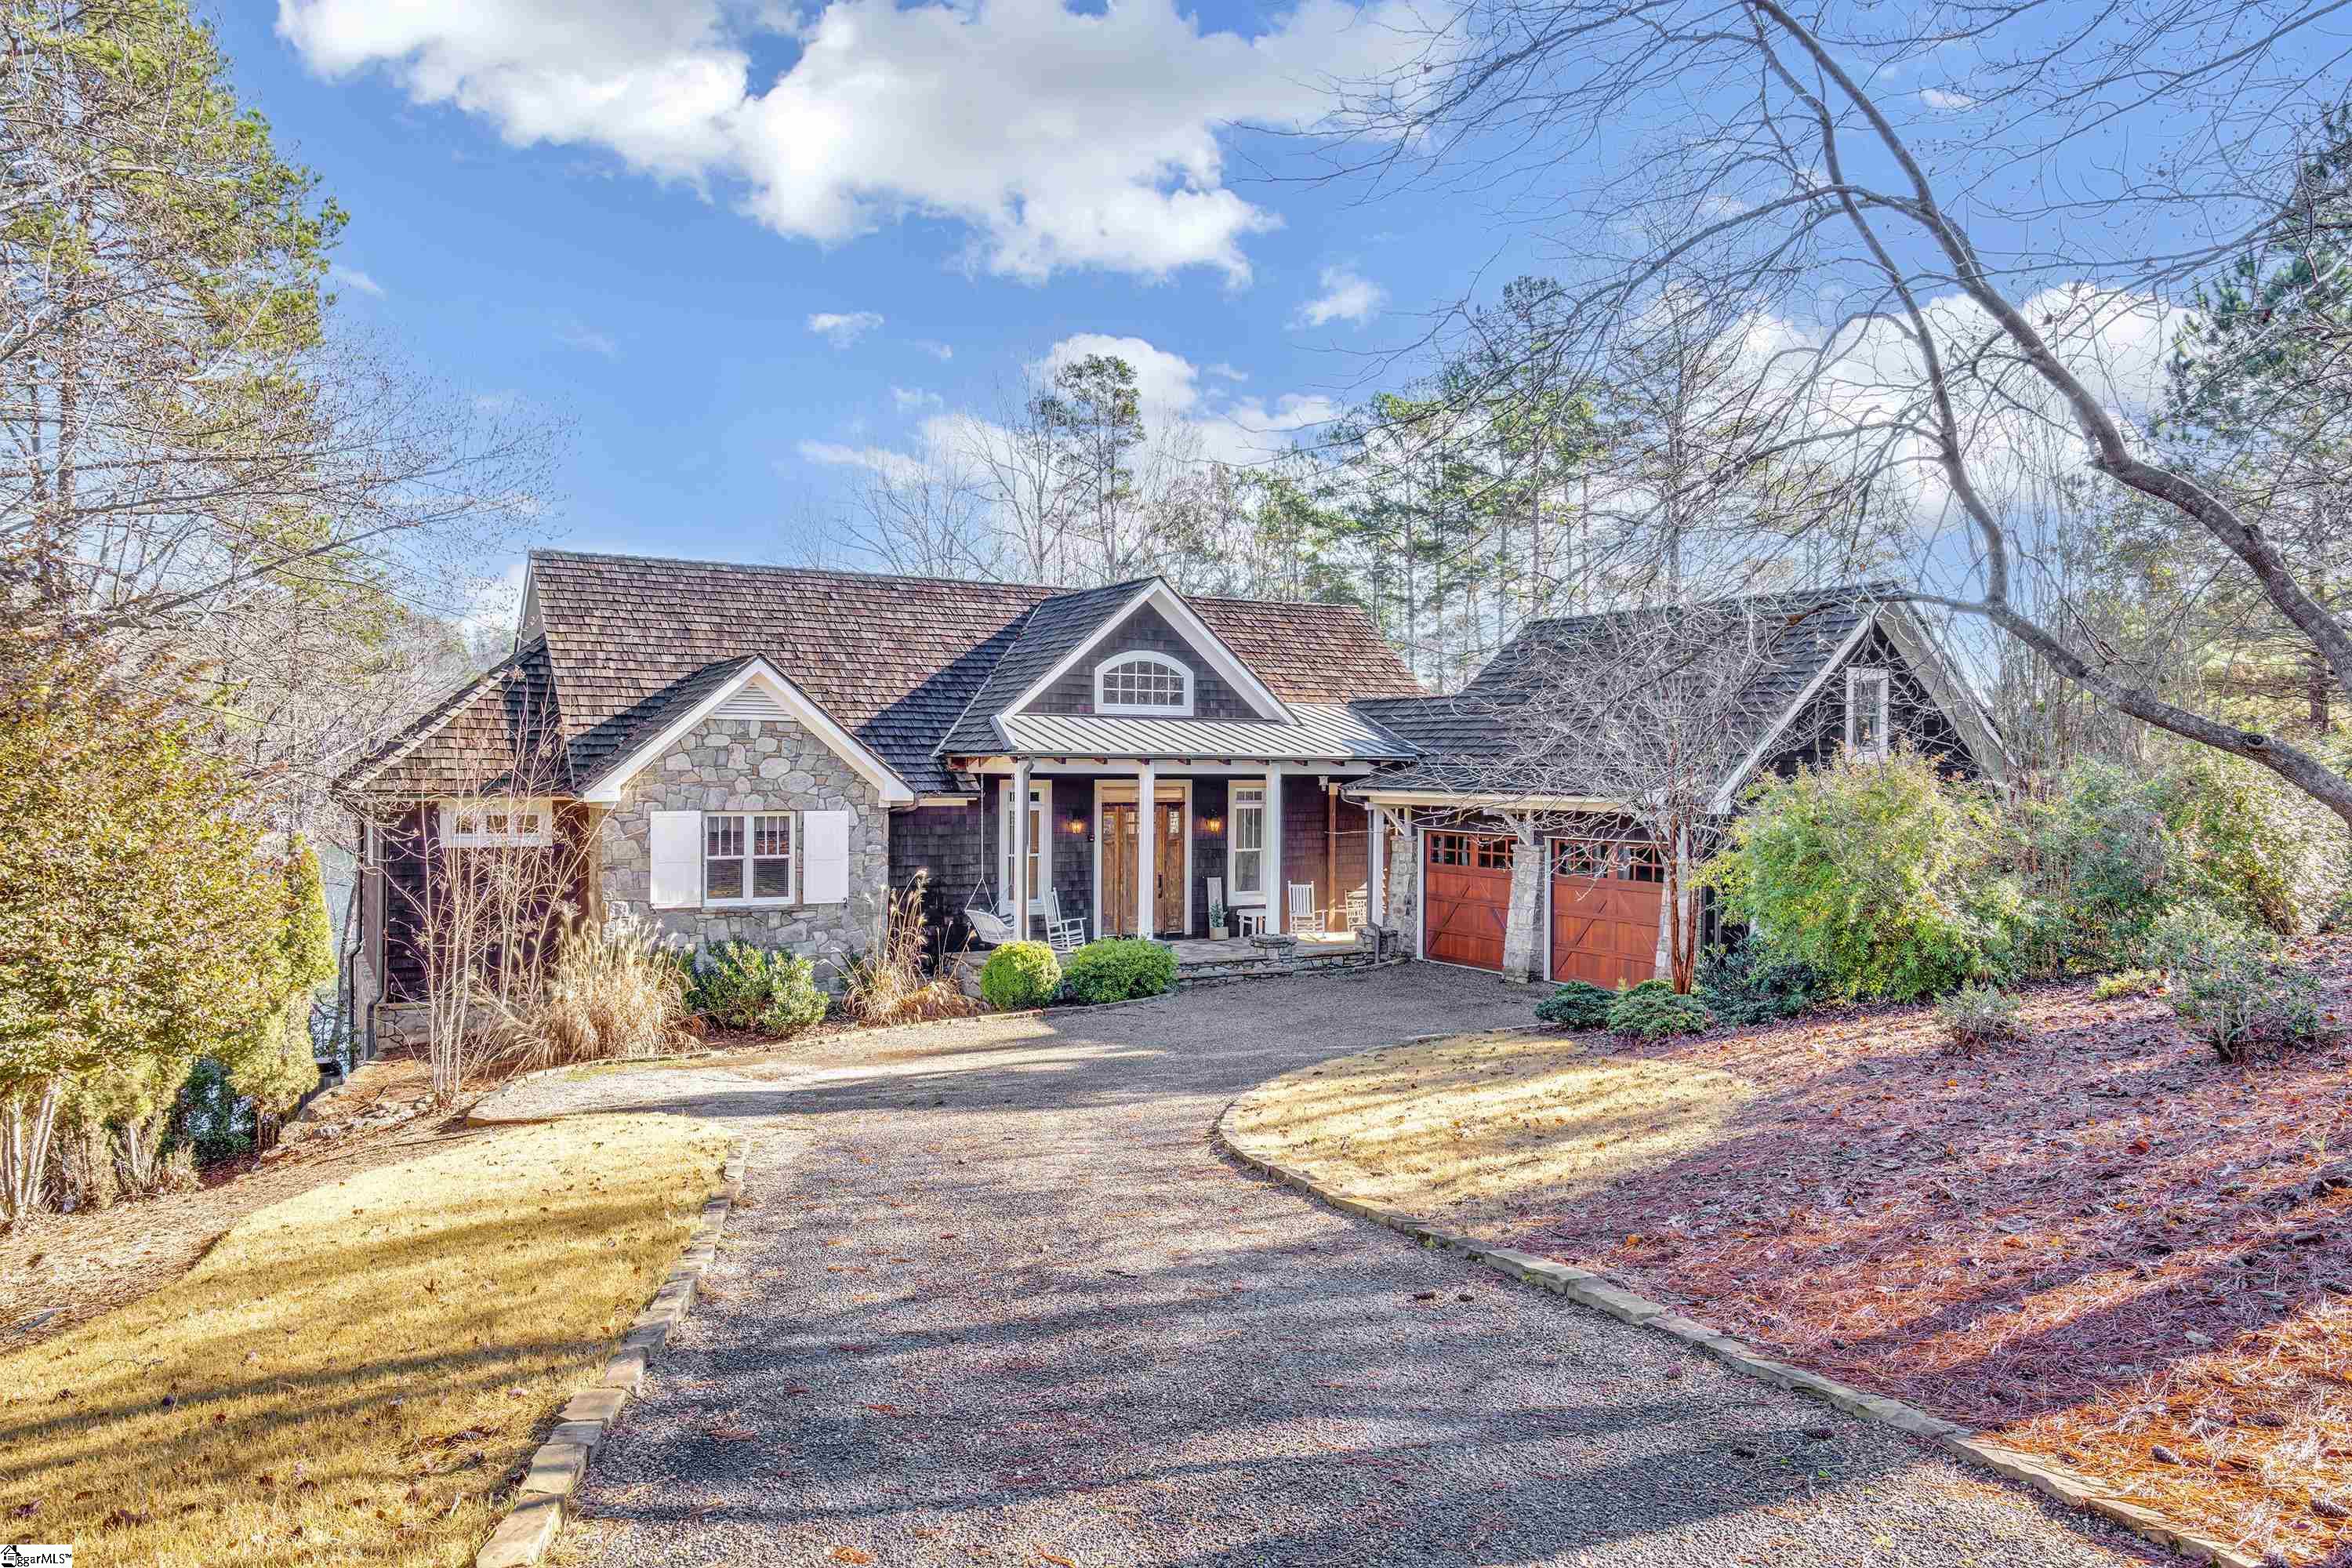 This perfect Lake Keowee waterfront home is situated on an easily maintained, VERY gently sloped homesite in one of the best areas of The Reserve! A pretty front porch wraps into a side grilling porch under breezeway. The main level open living space has heartpine floors, majestic floor to ceiling stone fireplace, lots of natural light from windows, a wood-paneled, vaulted ceiling. The lakeside rear of home faces east, with incredible views overlooking a large, deep-water cove. The spacious main level outdoor deck is about 800 sf; almost half is under roof. Custom cabinetry & built-ins are throughout. The kitchen features 2 dishwashers & Dacor gas cooktop. Master suite on main level, as well as one guest.All 4 bedrooms have adjoining baths; in addition, a guest suite is in bonus over garage. Terrace living area has slate floors, stone fireplace. Easy access to lakeside terrace and covered dock (with lift) via stone steps with handrails. The level side yard is a great play area.Laundry is situated on the main level. Gentle drive leads to double garage. RLK club premier membership fee of $72,000 is not included in sales price; fee is required & due at closing.